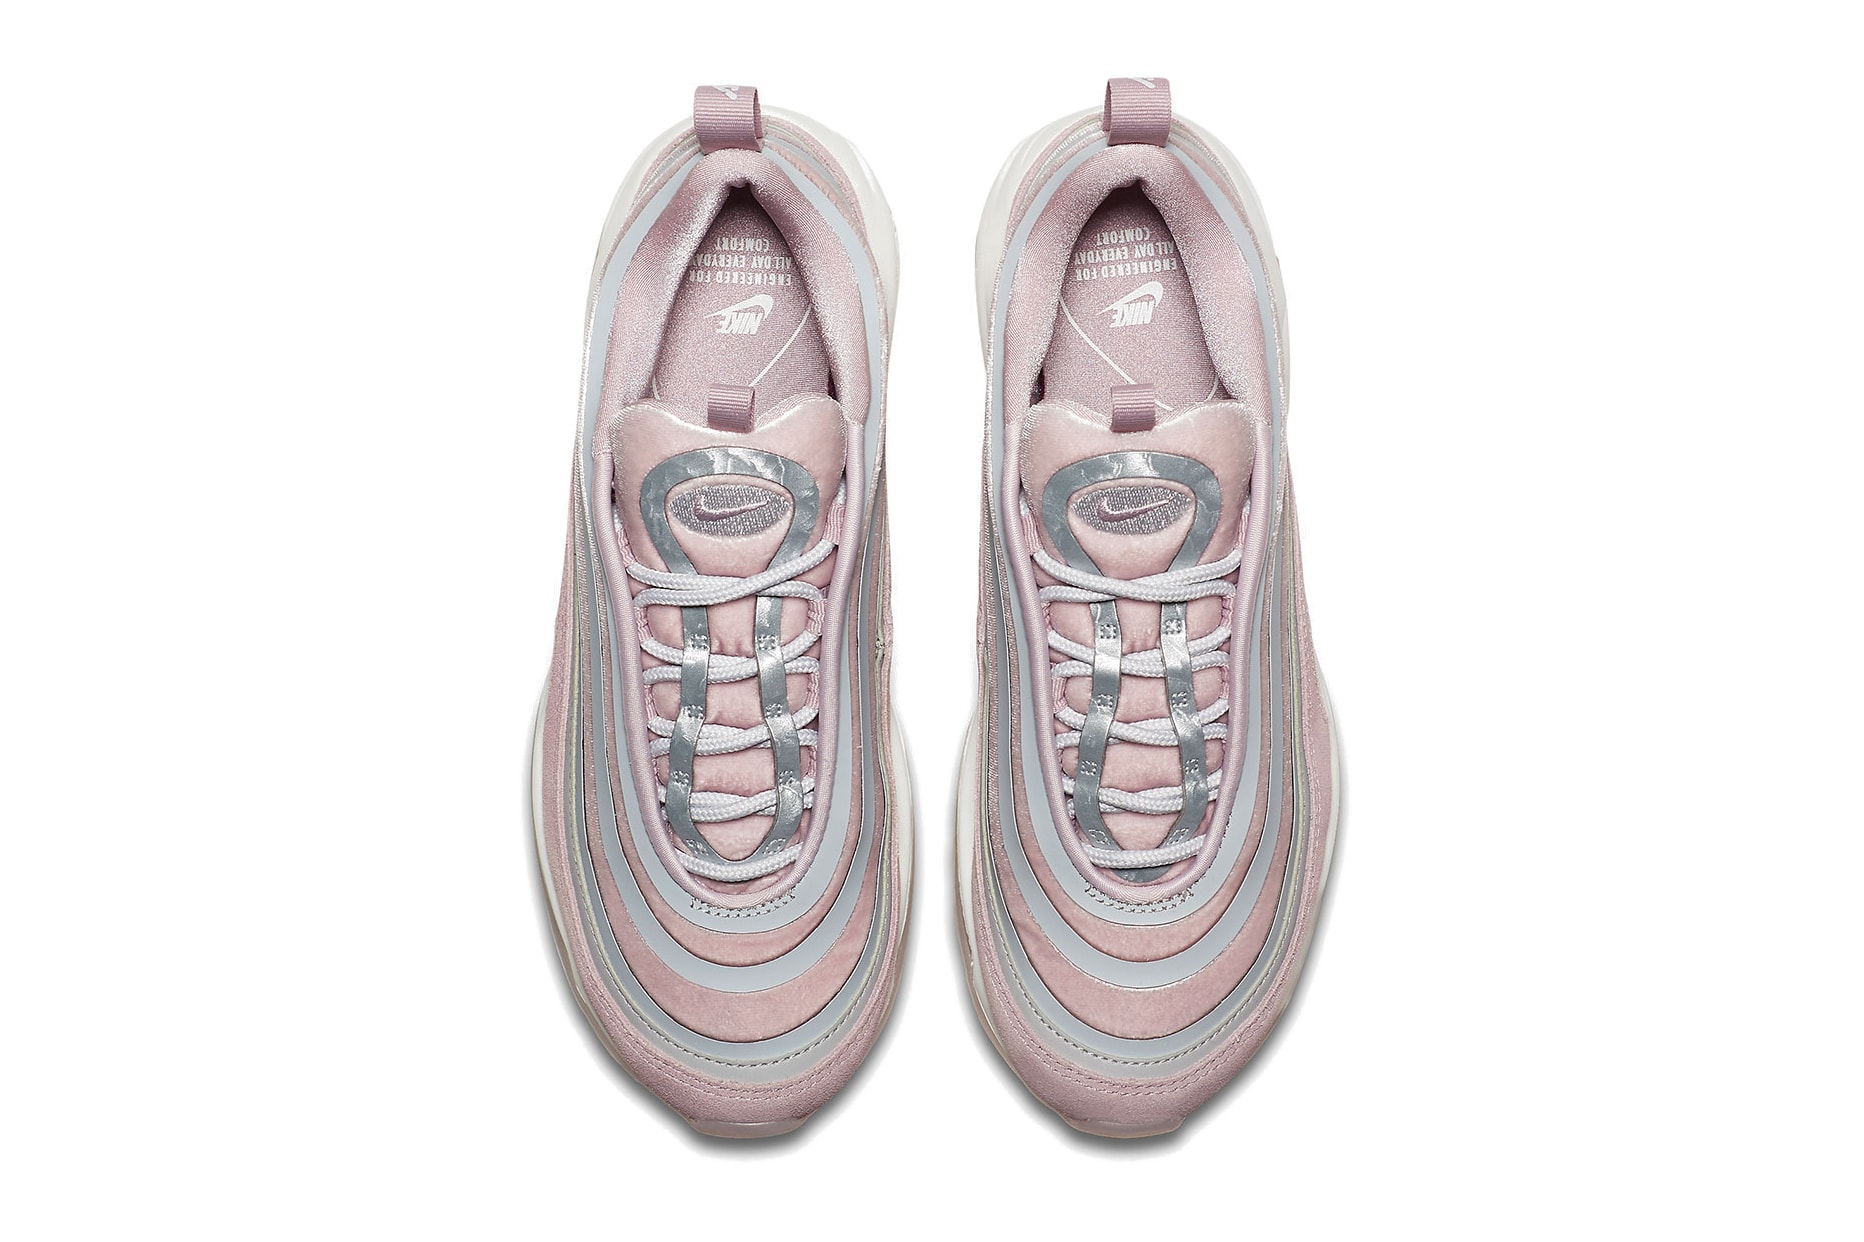 Nike Air Max 97 Ultra LX Particle Pink Vast Grey Summit White Sneaker Suede Leather Textile Mesh Upper Retro Shoe